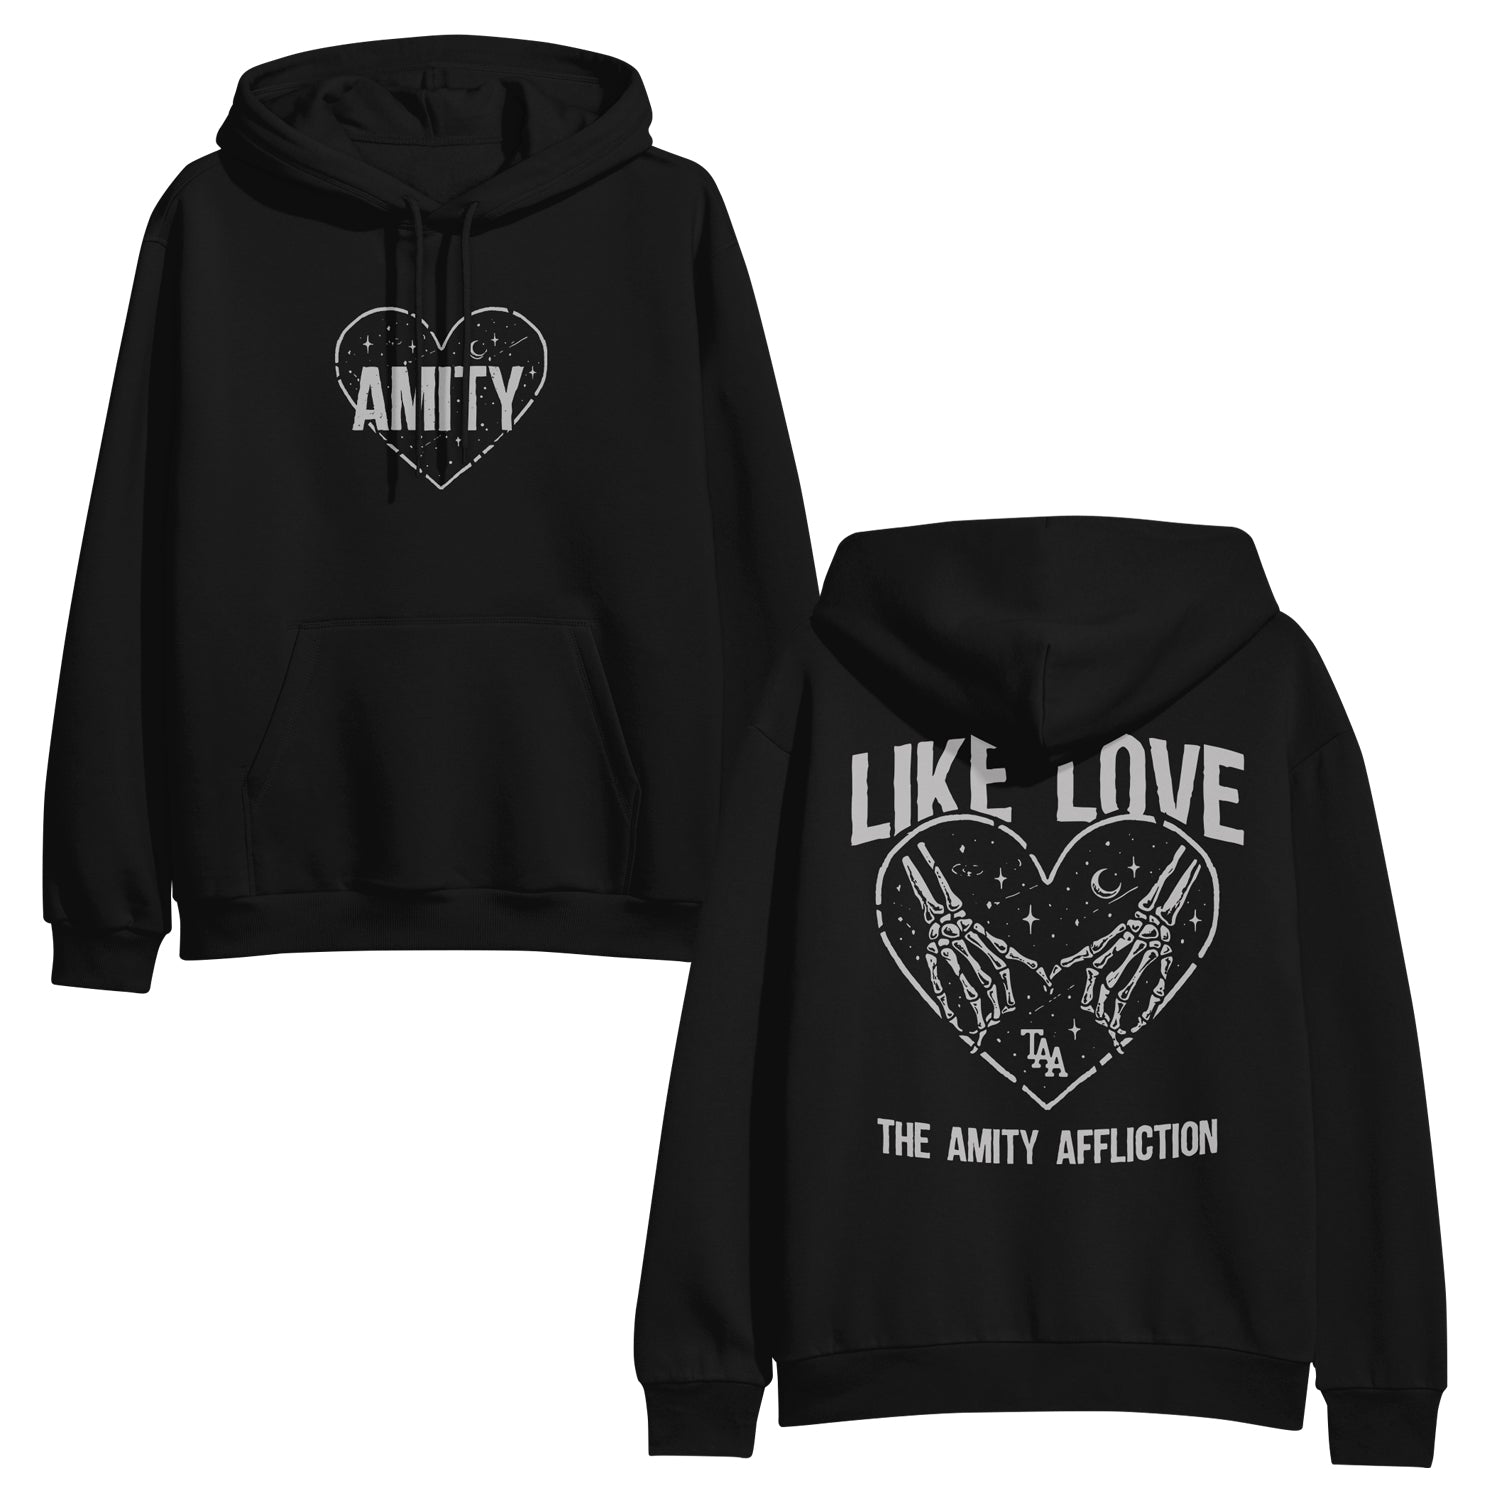 front & back image of a black pullover hoodie on a white background. . The front of the hoodie has a white heart outline filled with stars & a small crescent moon. On top of that in white bold text it says Amity.the back Across the shoulder area in white says Like love. Below that is and outlined heart filled with stars and a small crescent moon. Two skeleton hands holding pinky fingers are also inside. Below the hands it says TAA. Below the heart in white text it says the amity affliction